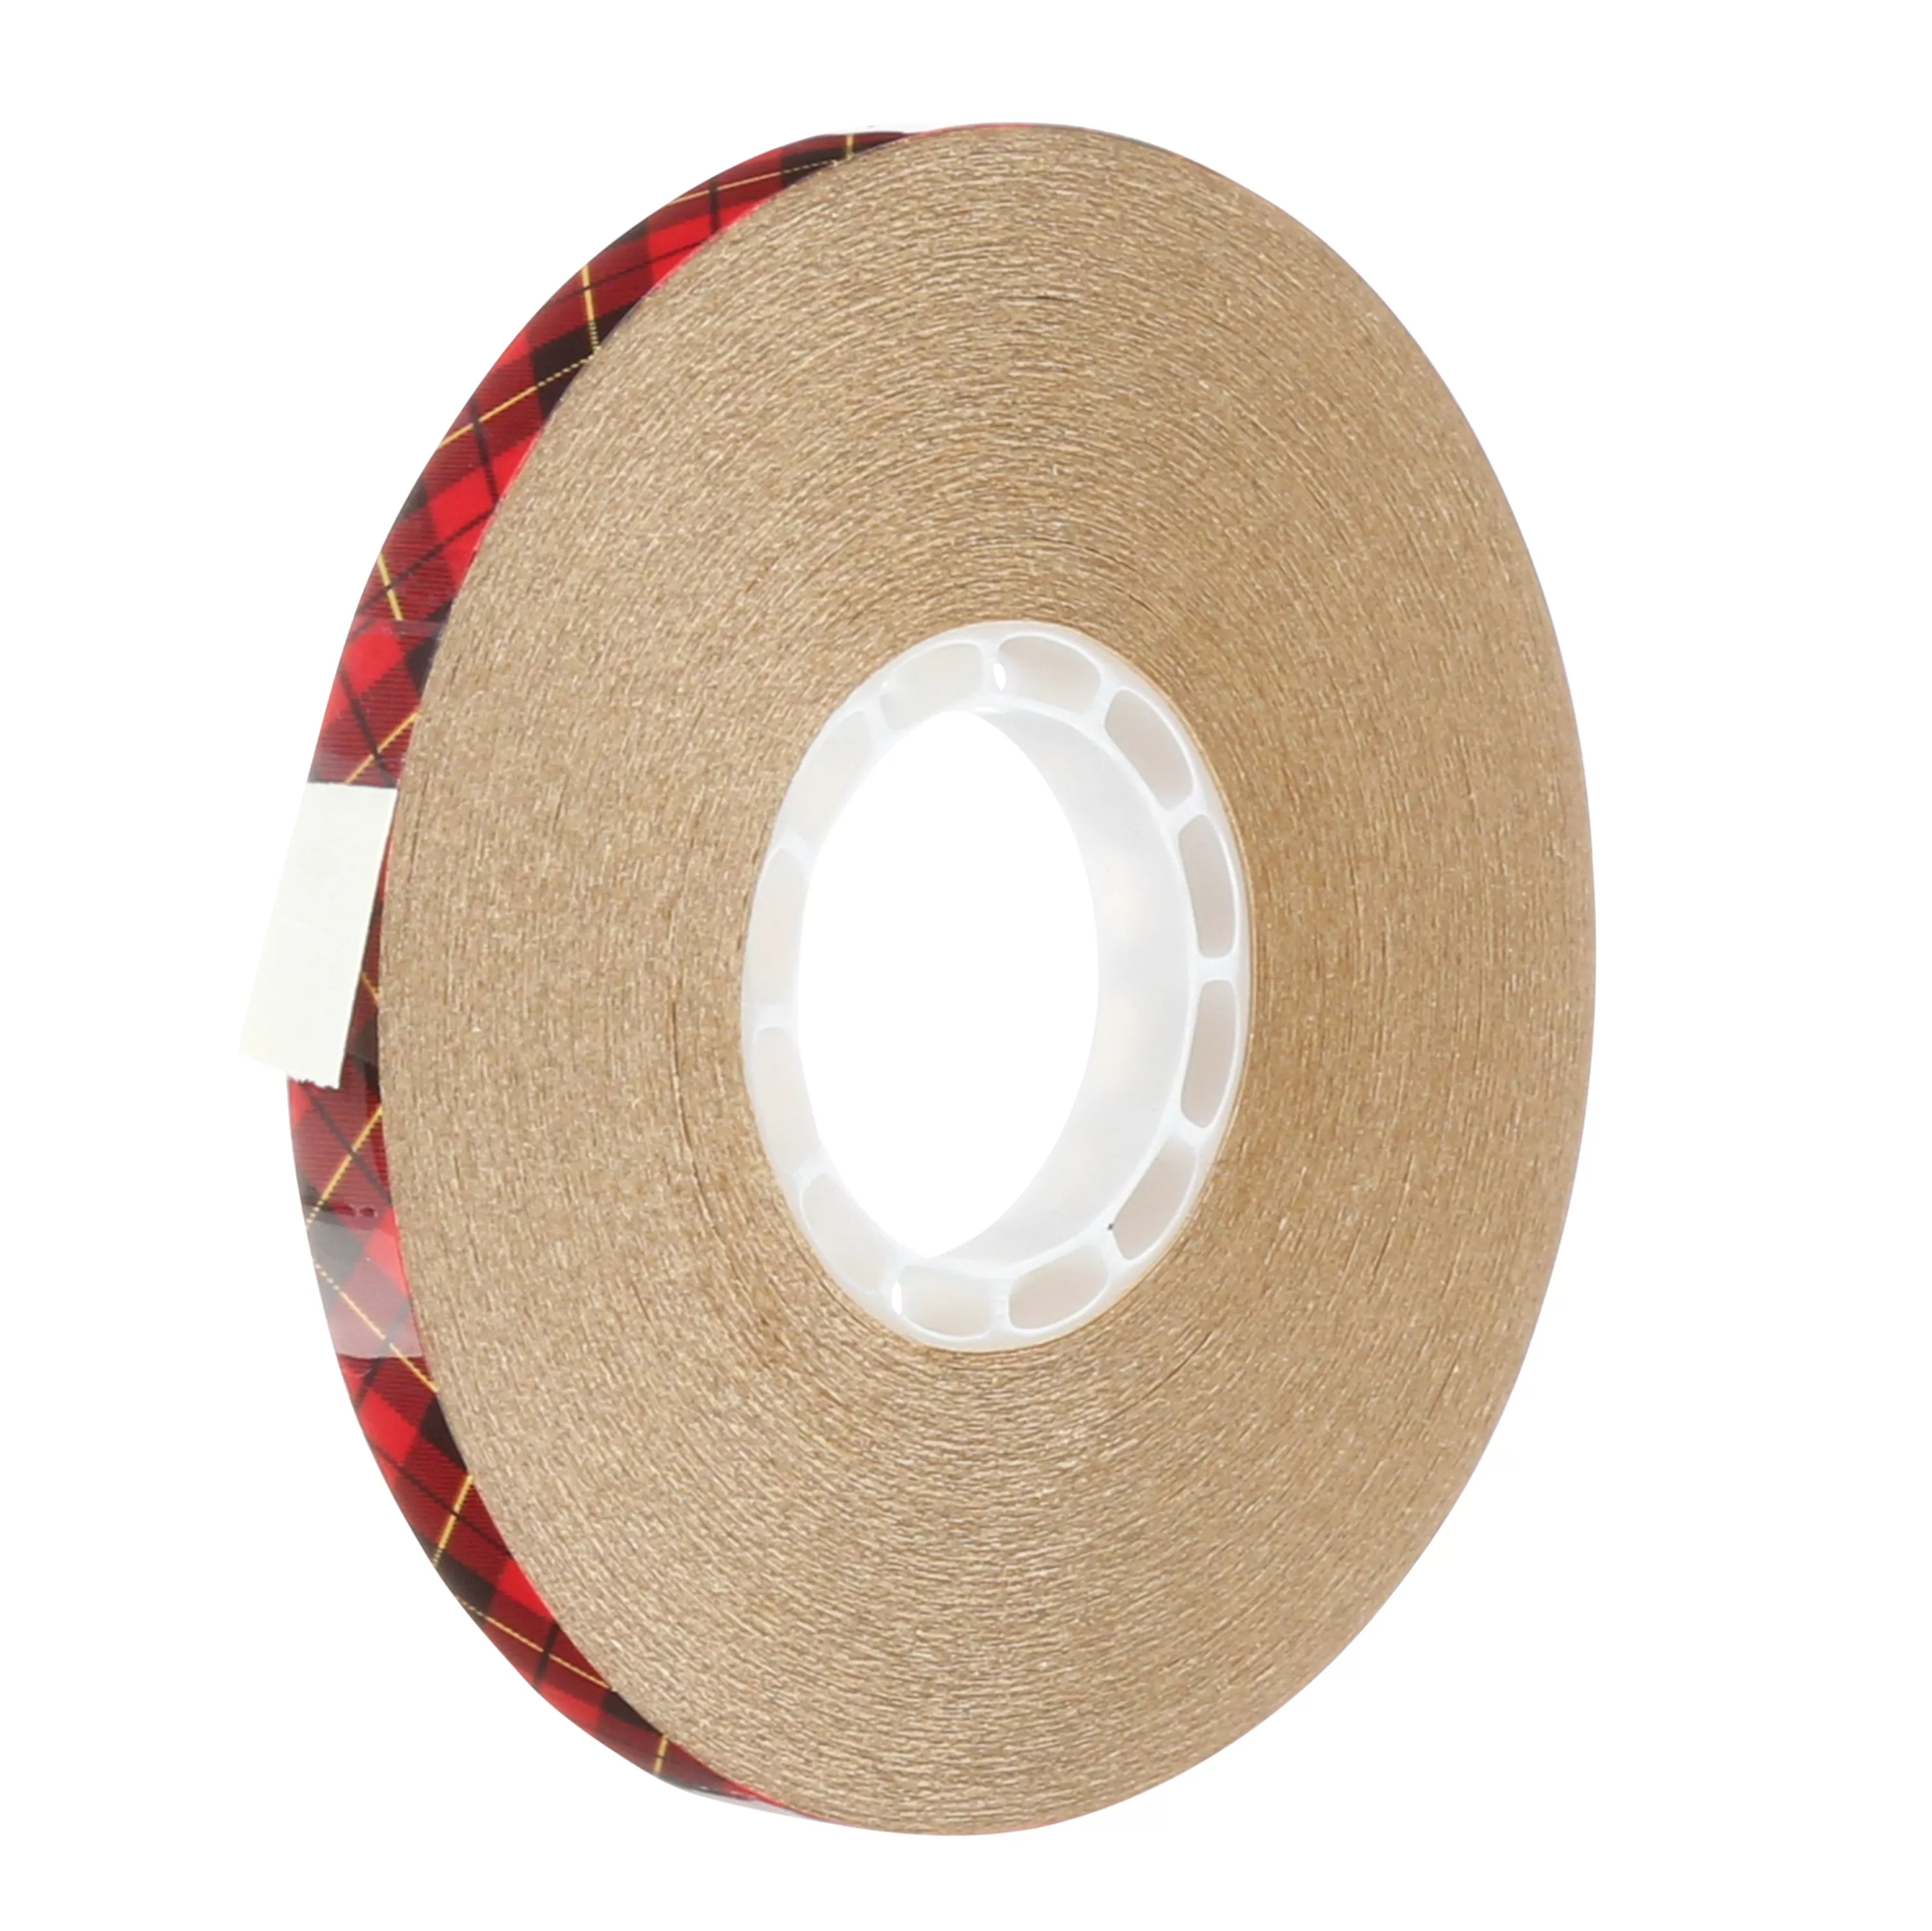 Scotch® ATG Adhesive Transfer Tape 924, Clear, 1/4 in x 36 yd, 2 mil,
(12 Roll/Carton) 72 Roll/Case